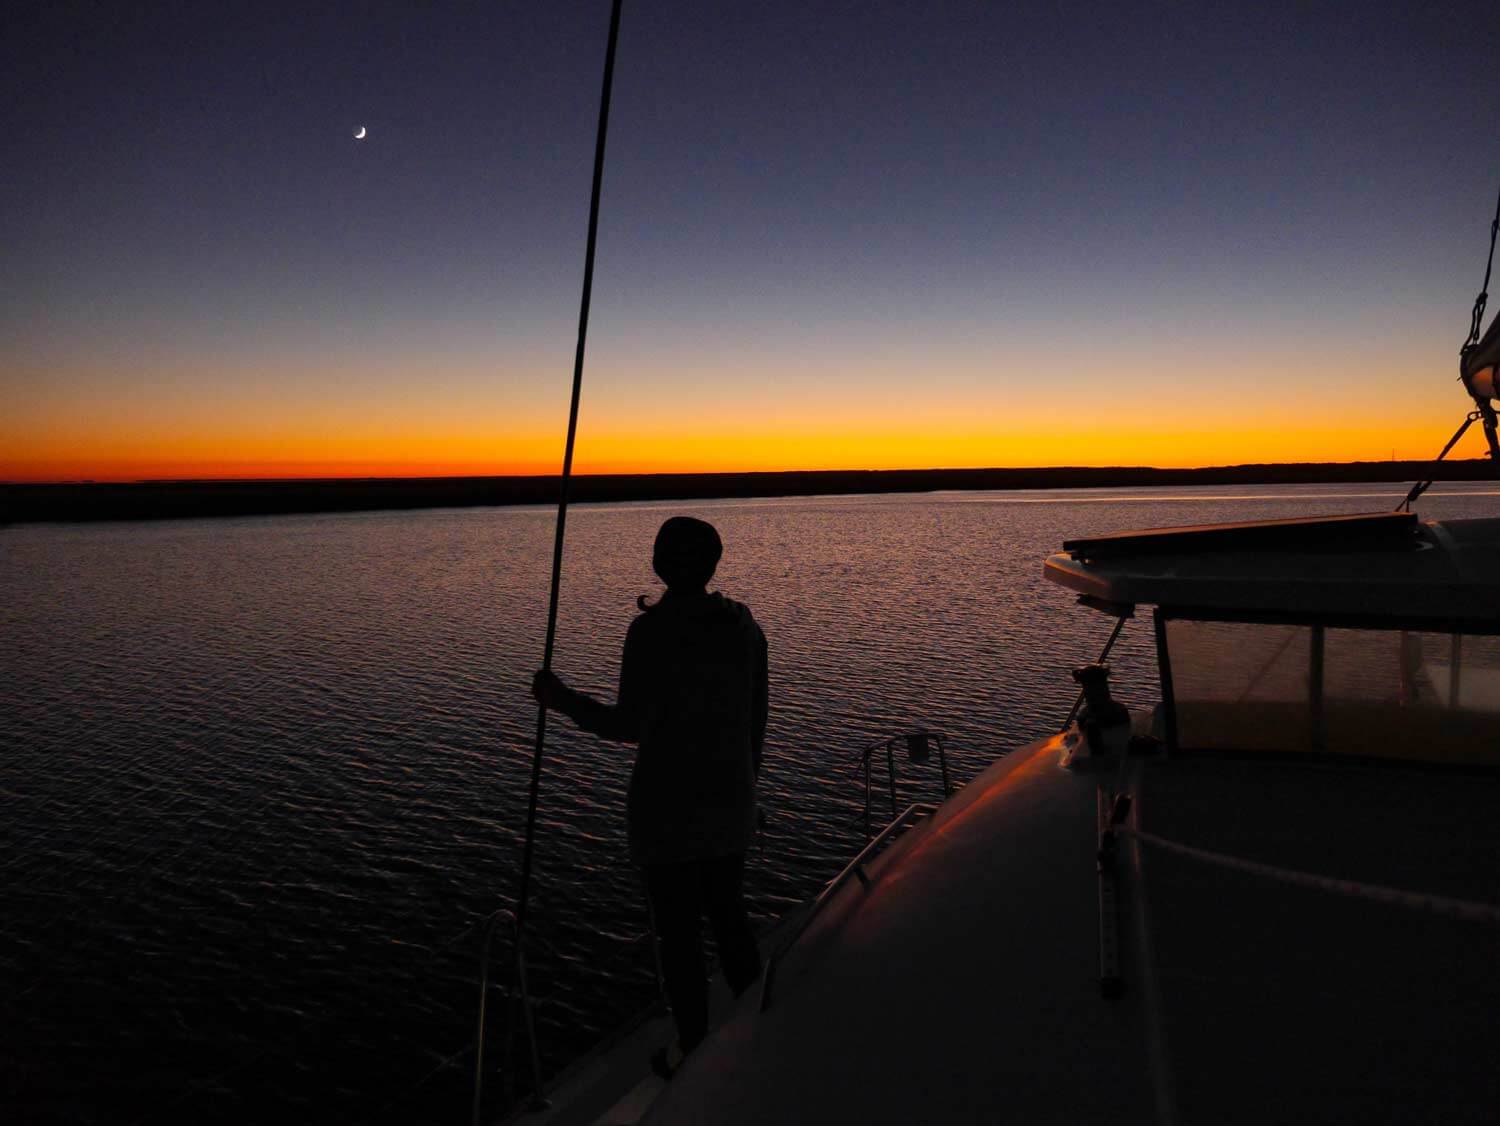 Silhouette at twilight on anchor on a sailboat